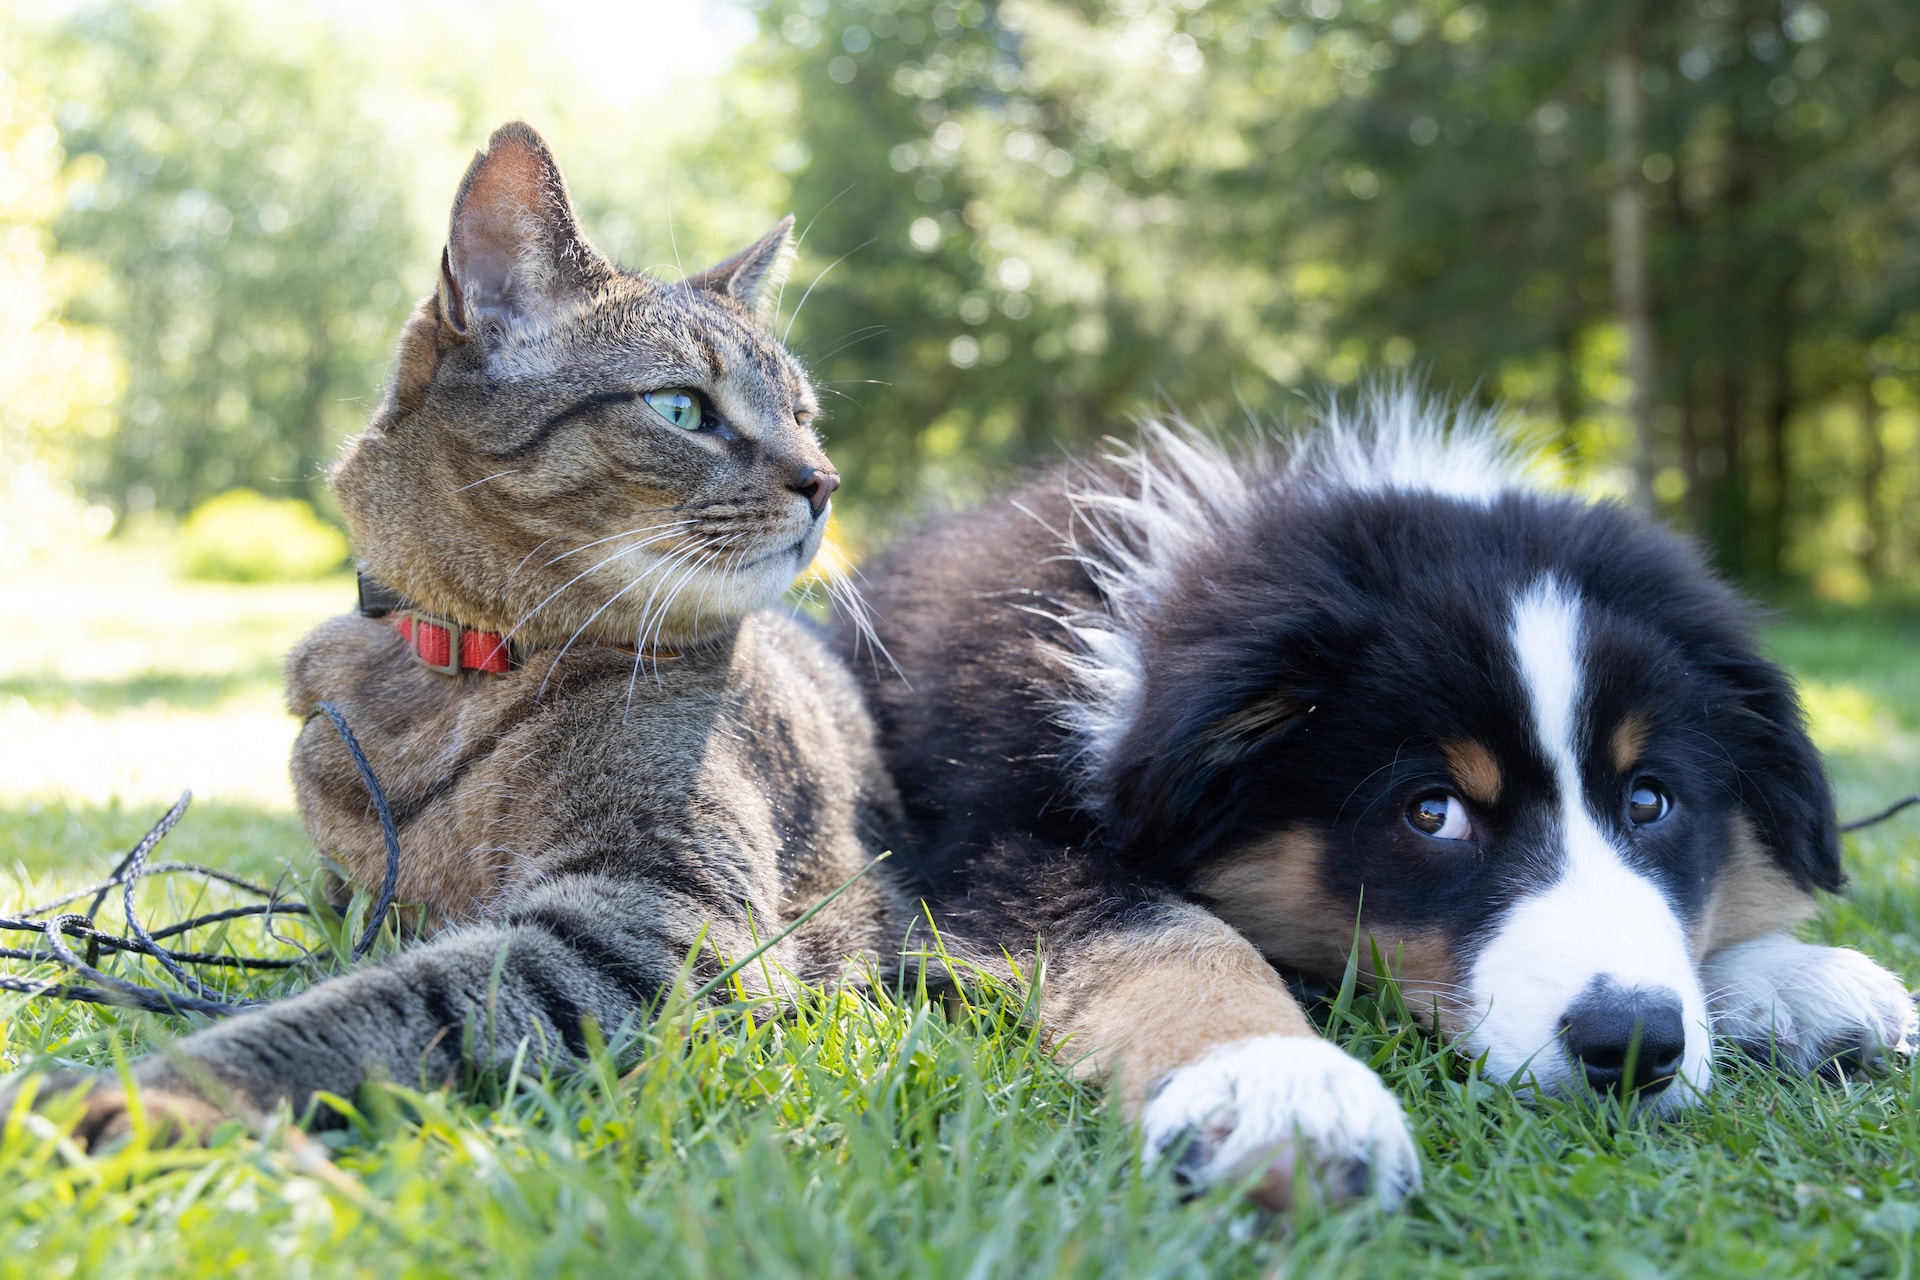 dog and cat laying together on grass